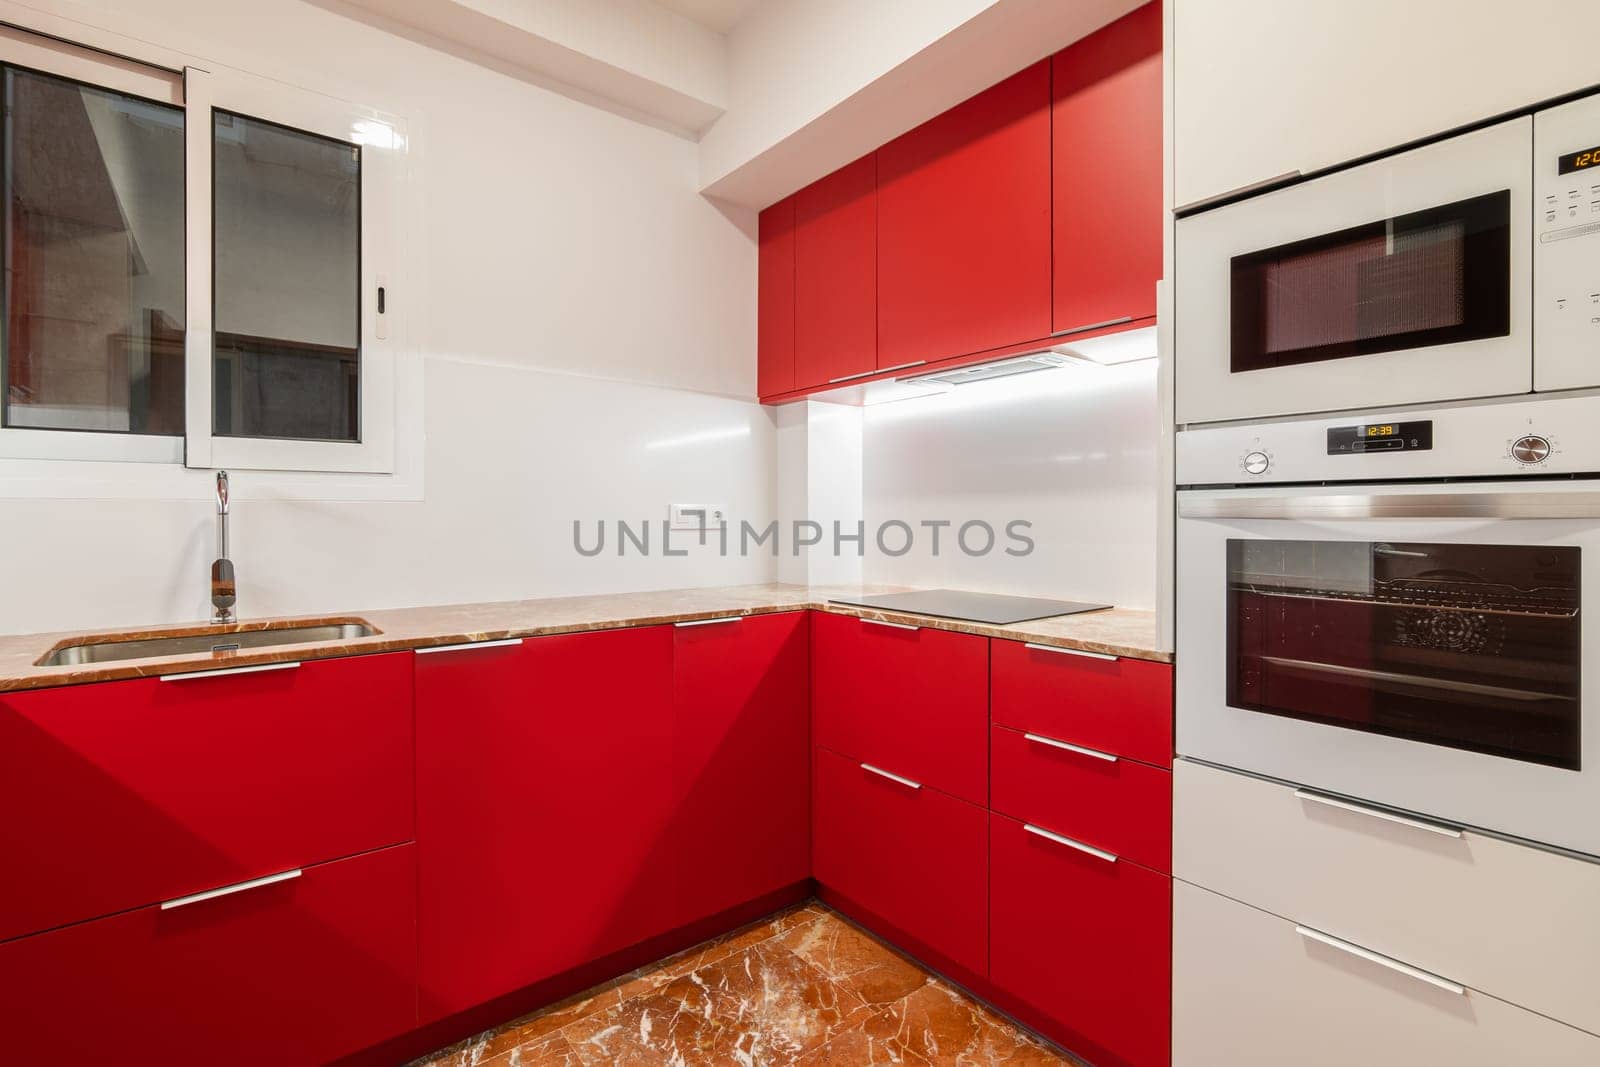 A modern Kitchen With Red Cabinets And White Appliances by apavlin